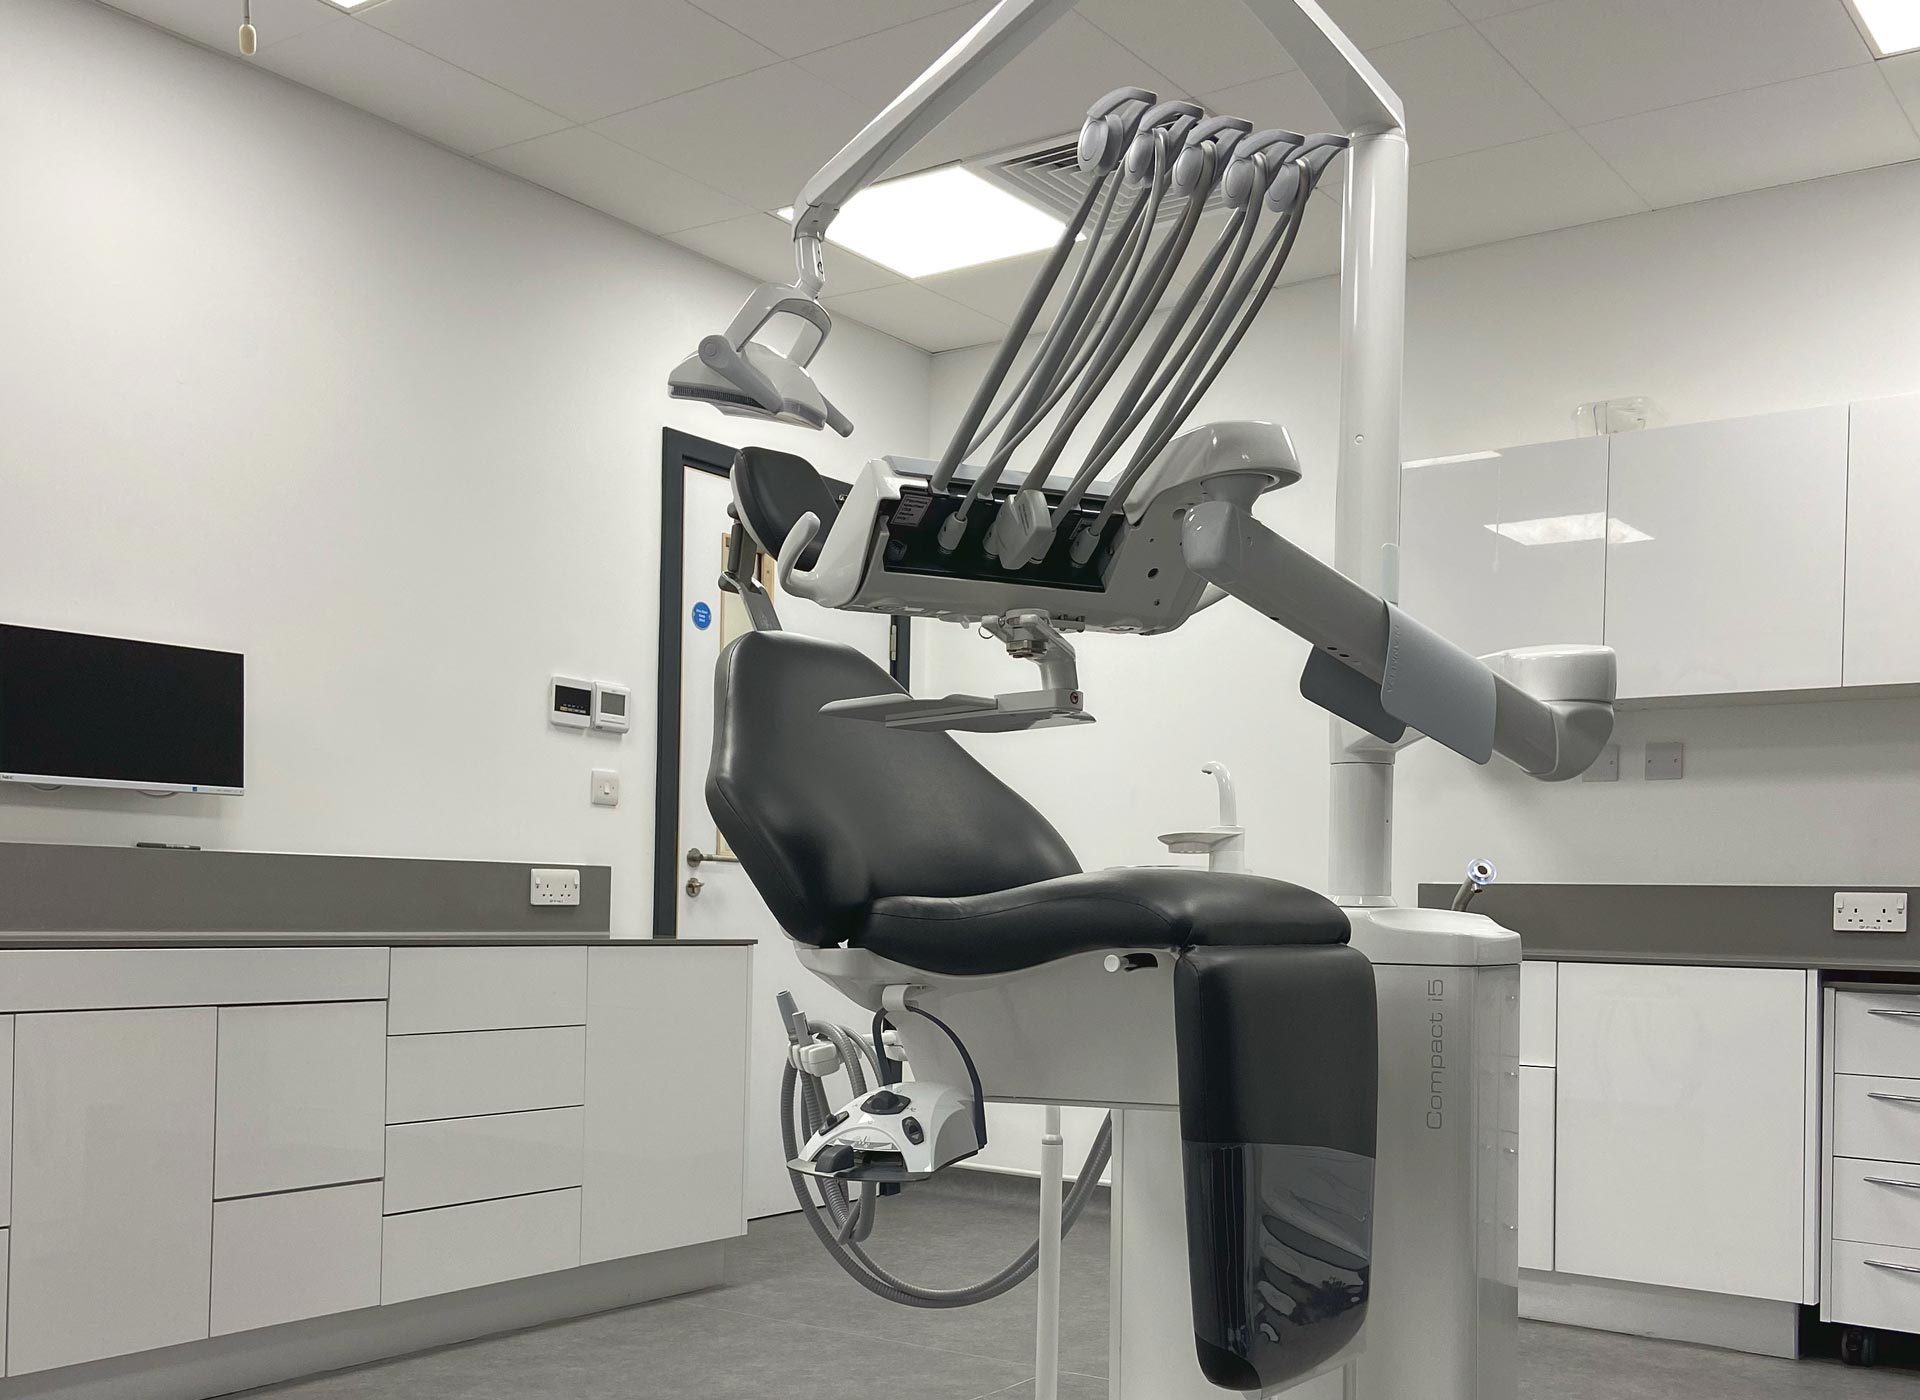 The Campbell Academy – dedicated to education and clinical excellence in implant dentistry